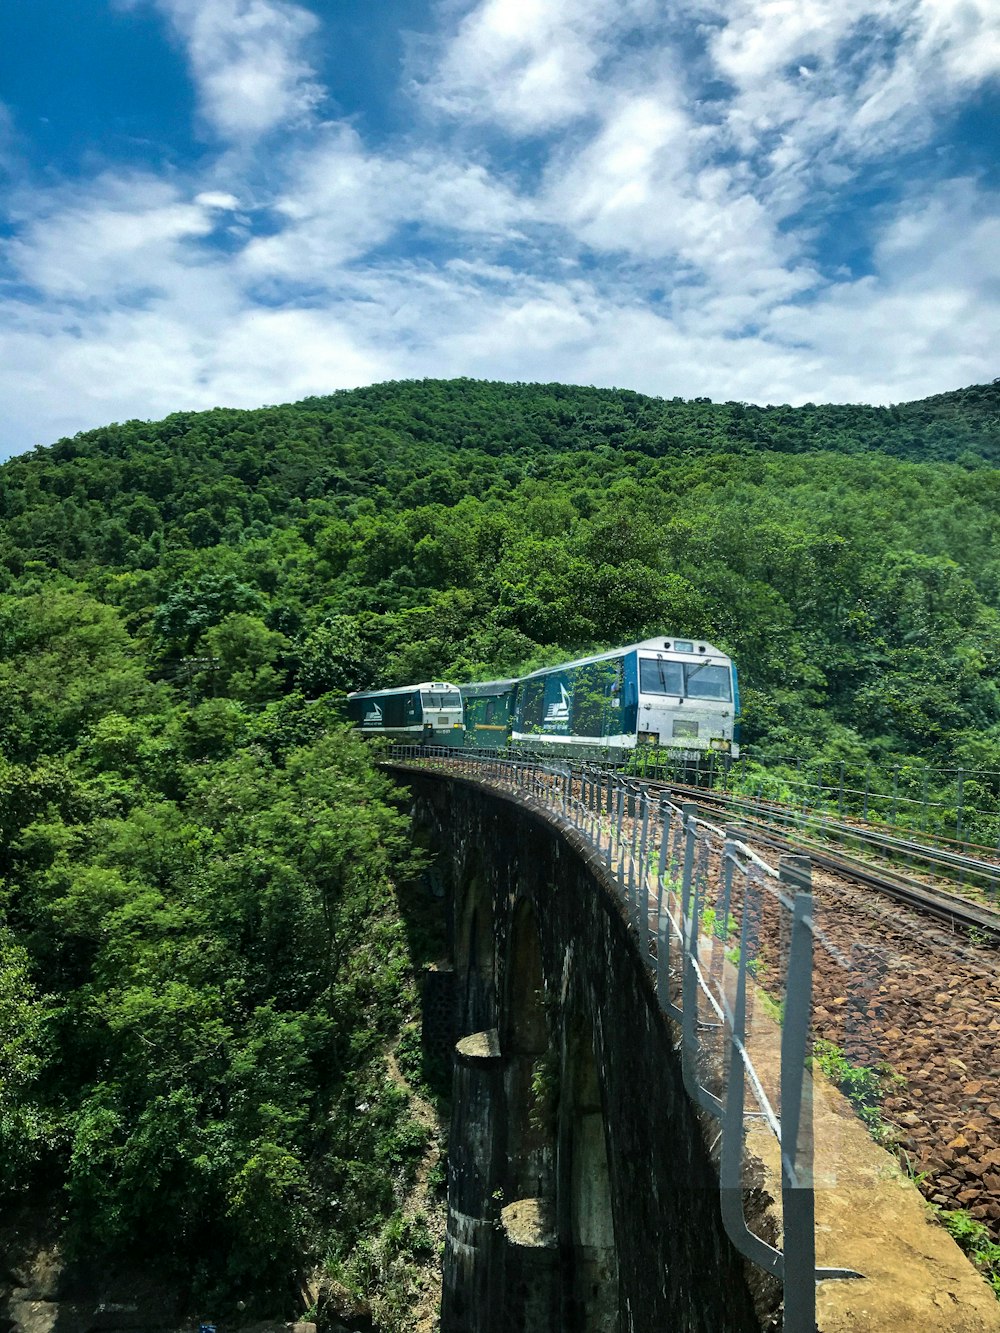 white train on rail near green trees under blue sky and white clouds during daytime